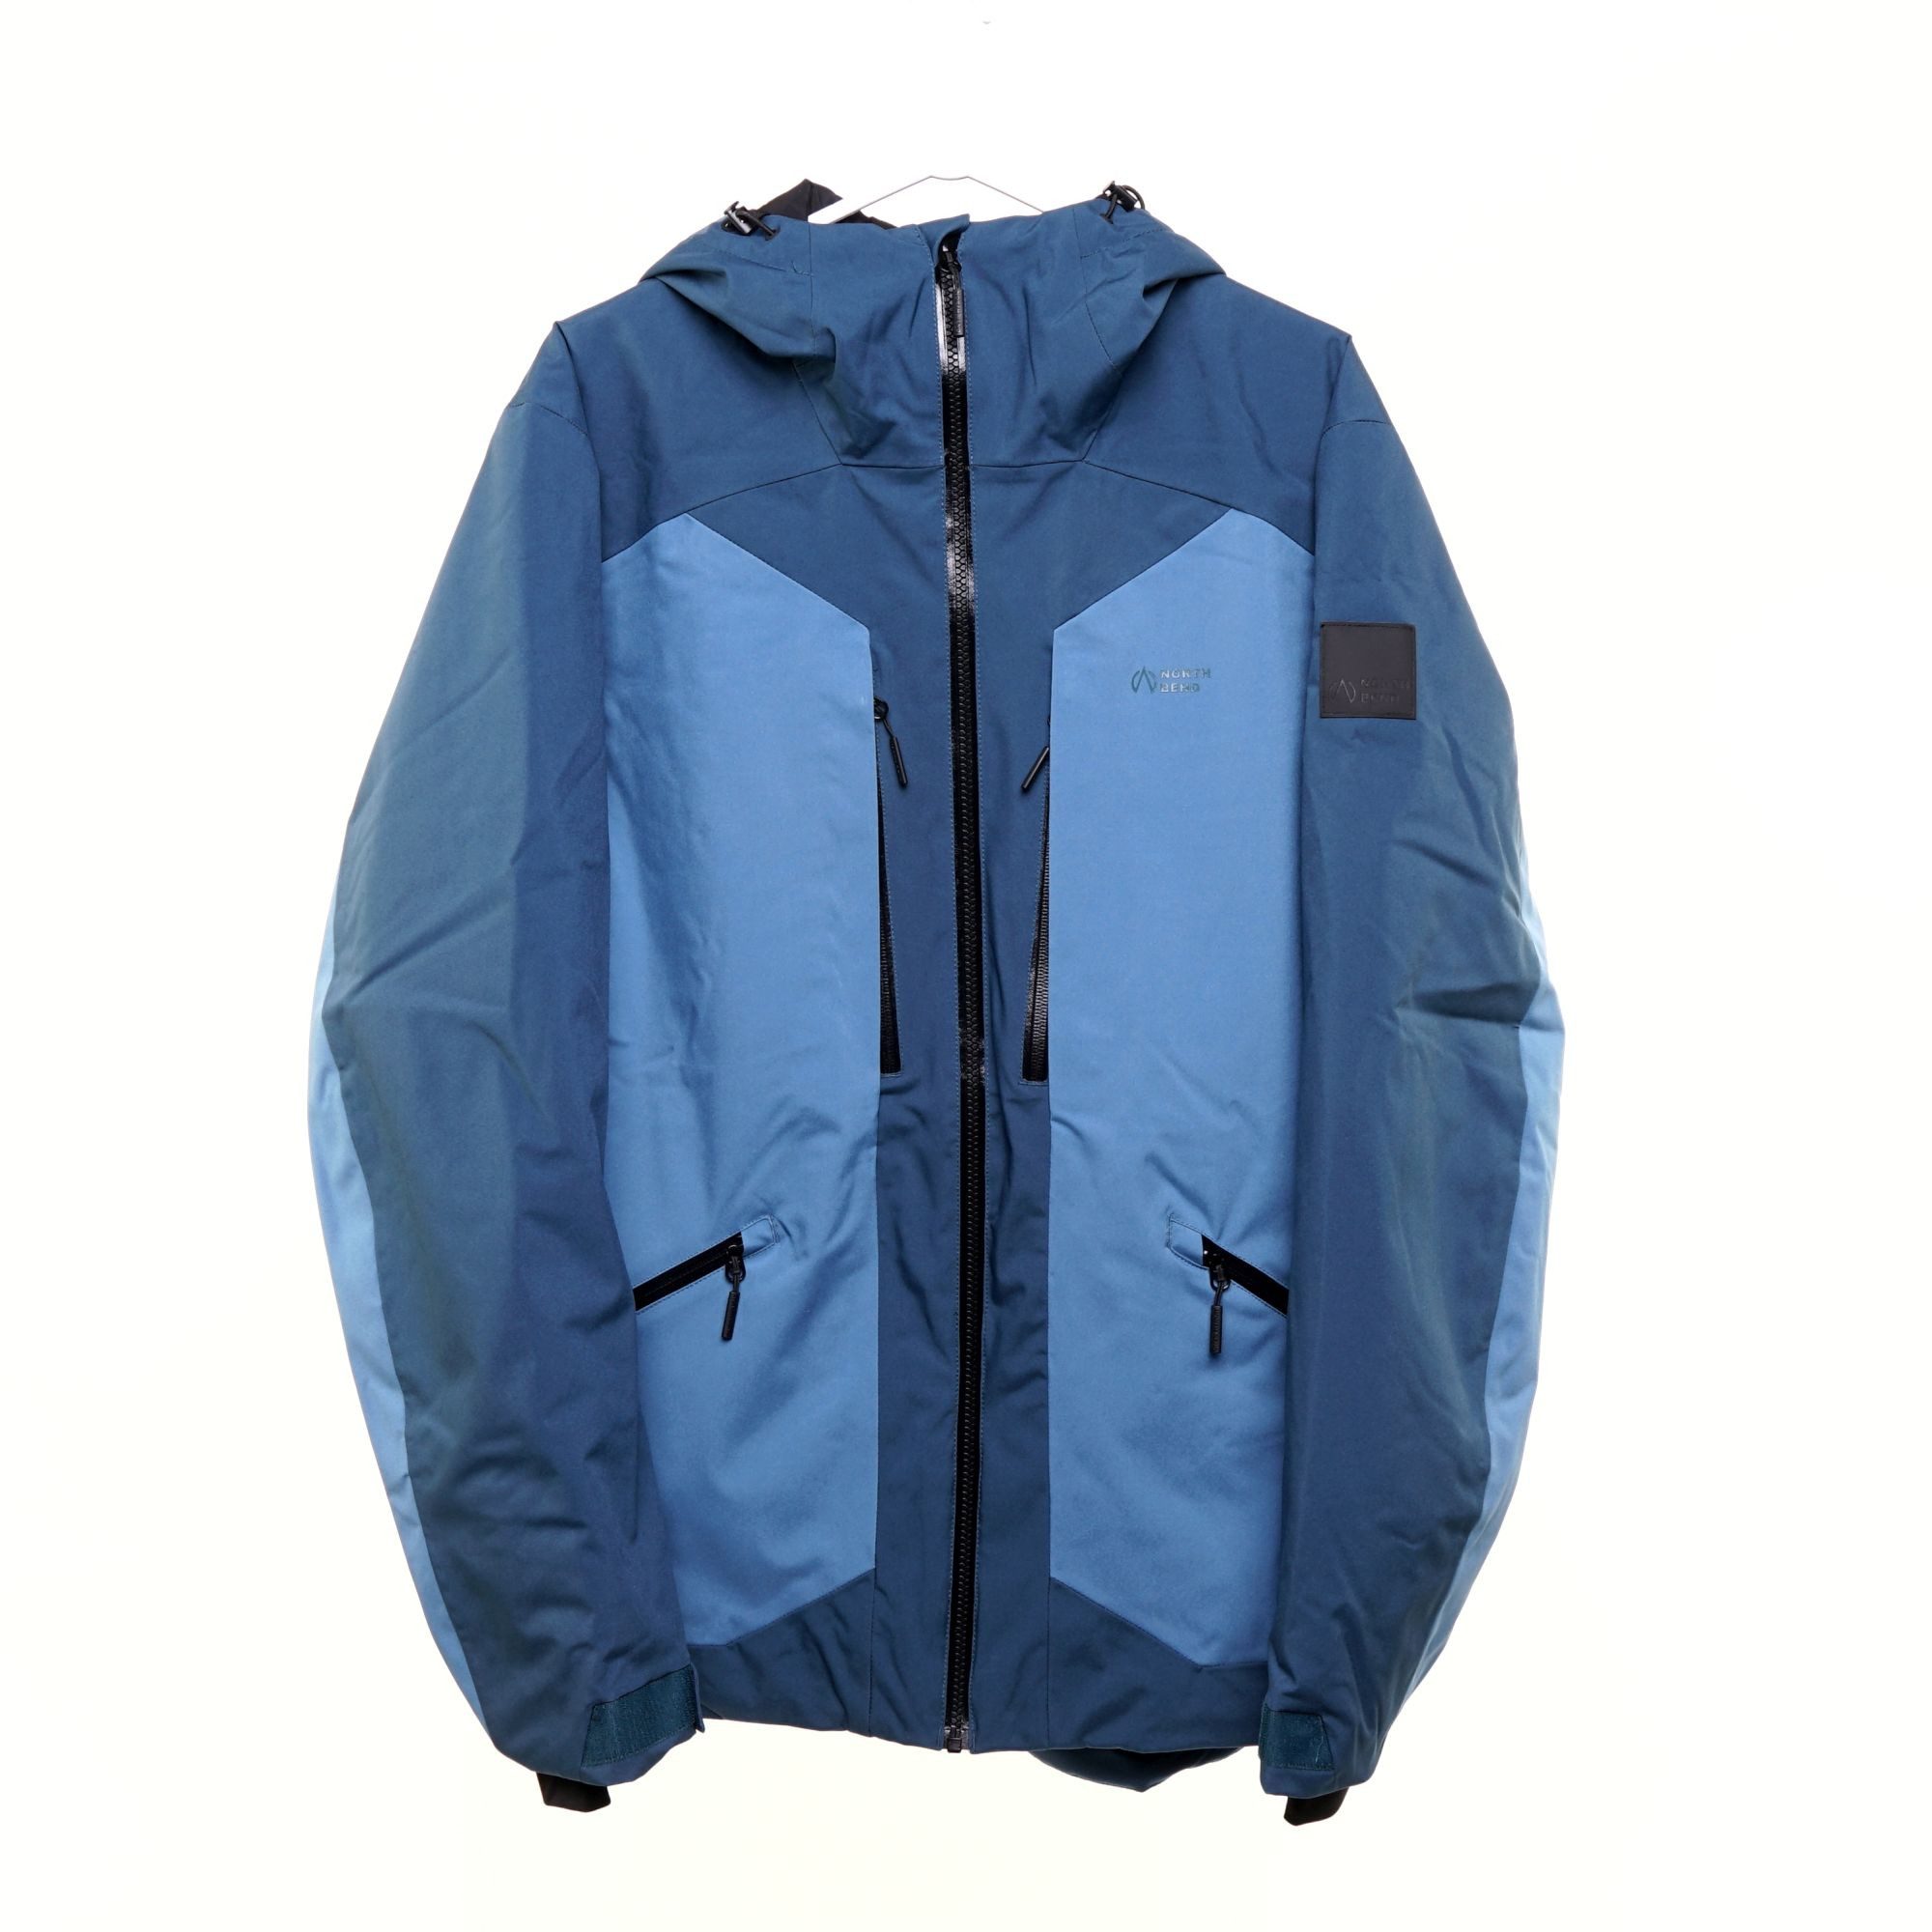 North Bend Allwetterjacke not found article